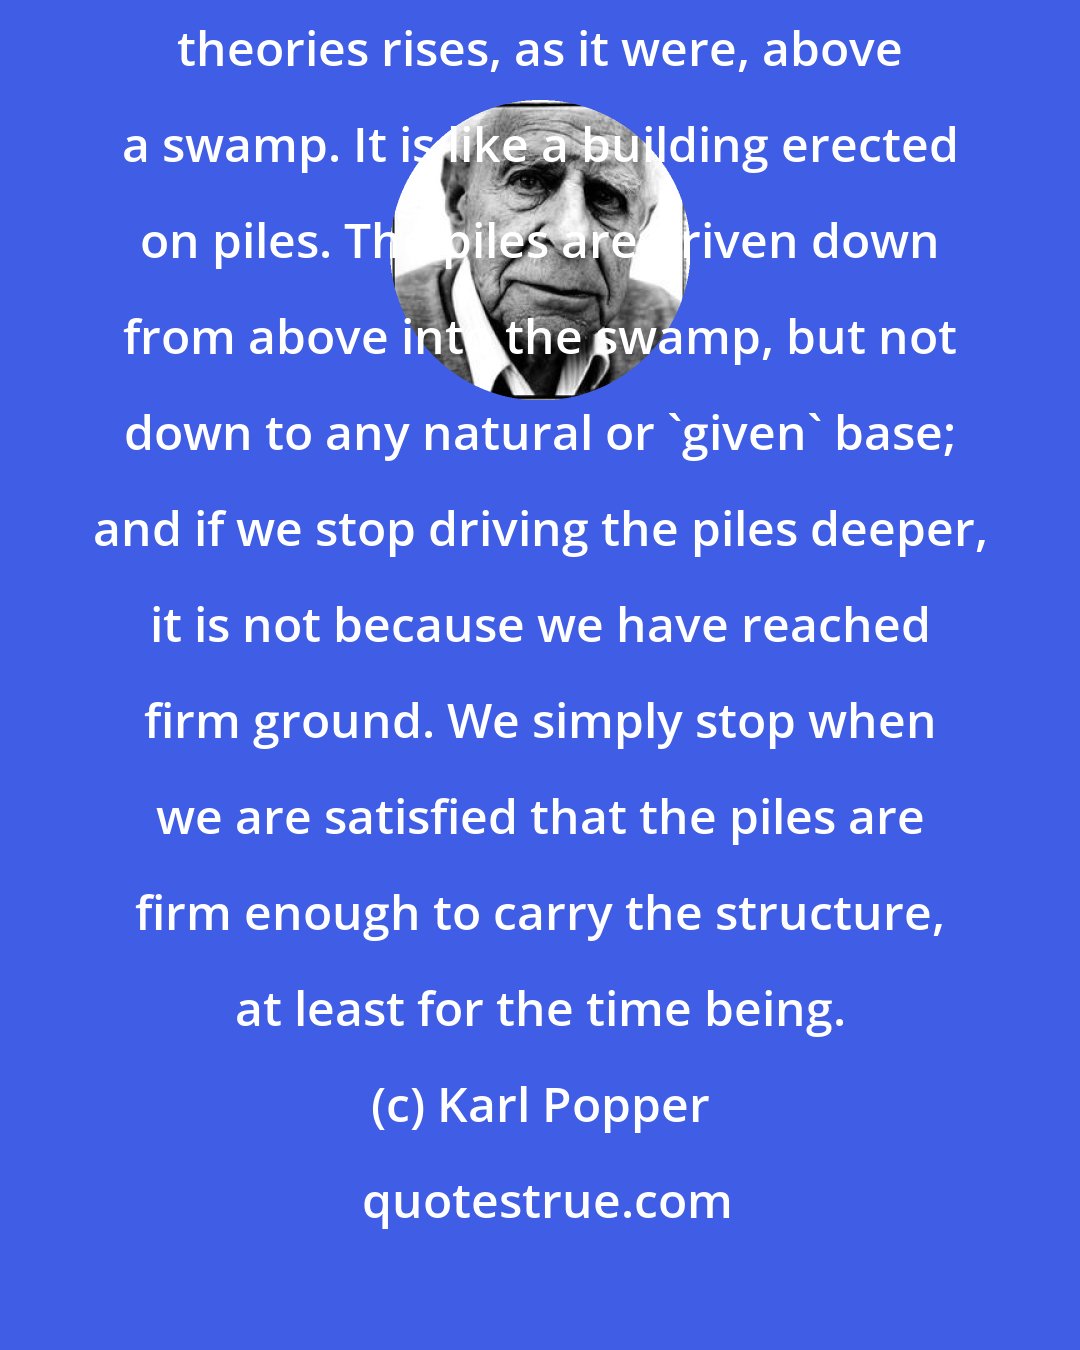 Karl Popper: Science does not rest upon solid bedrock. The bold structure of its theories rises, as it were, above a swamp. It is like a building erected on piles. The piles are driven down from above into the swamp, but not down to any natural or 'given' base; and if we stop driving the piles deeper, it is not because we have reached firm ground. We simply stop when we are satisfied that the piles are firm enough to carry the structure, at least for the time being.